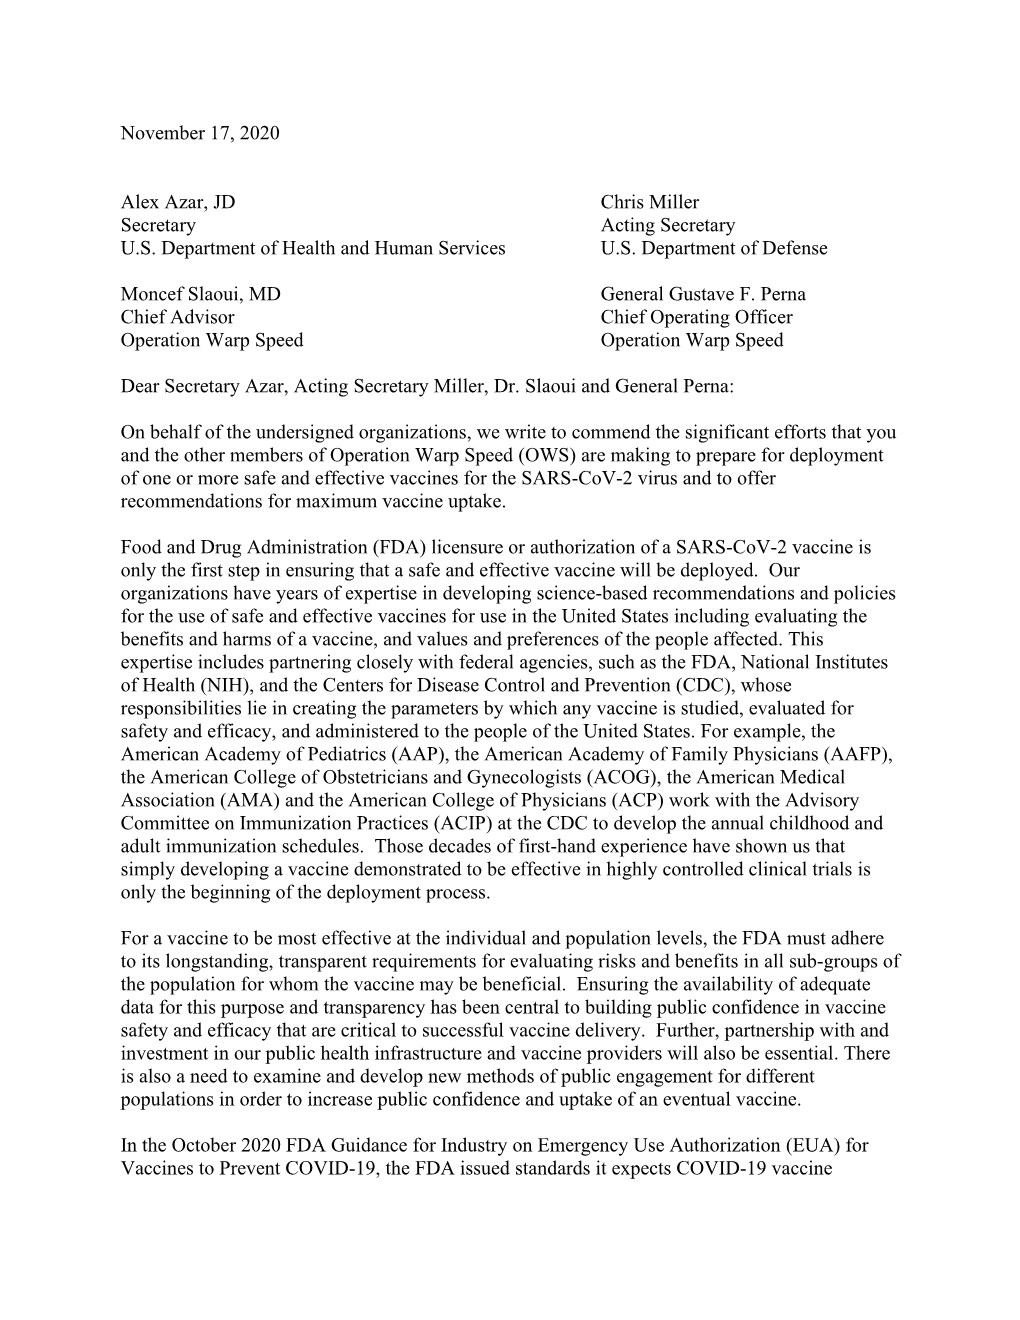 Joint Letter Regarding Safe COVID Vaccines from Operation Warp Speed